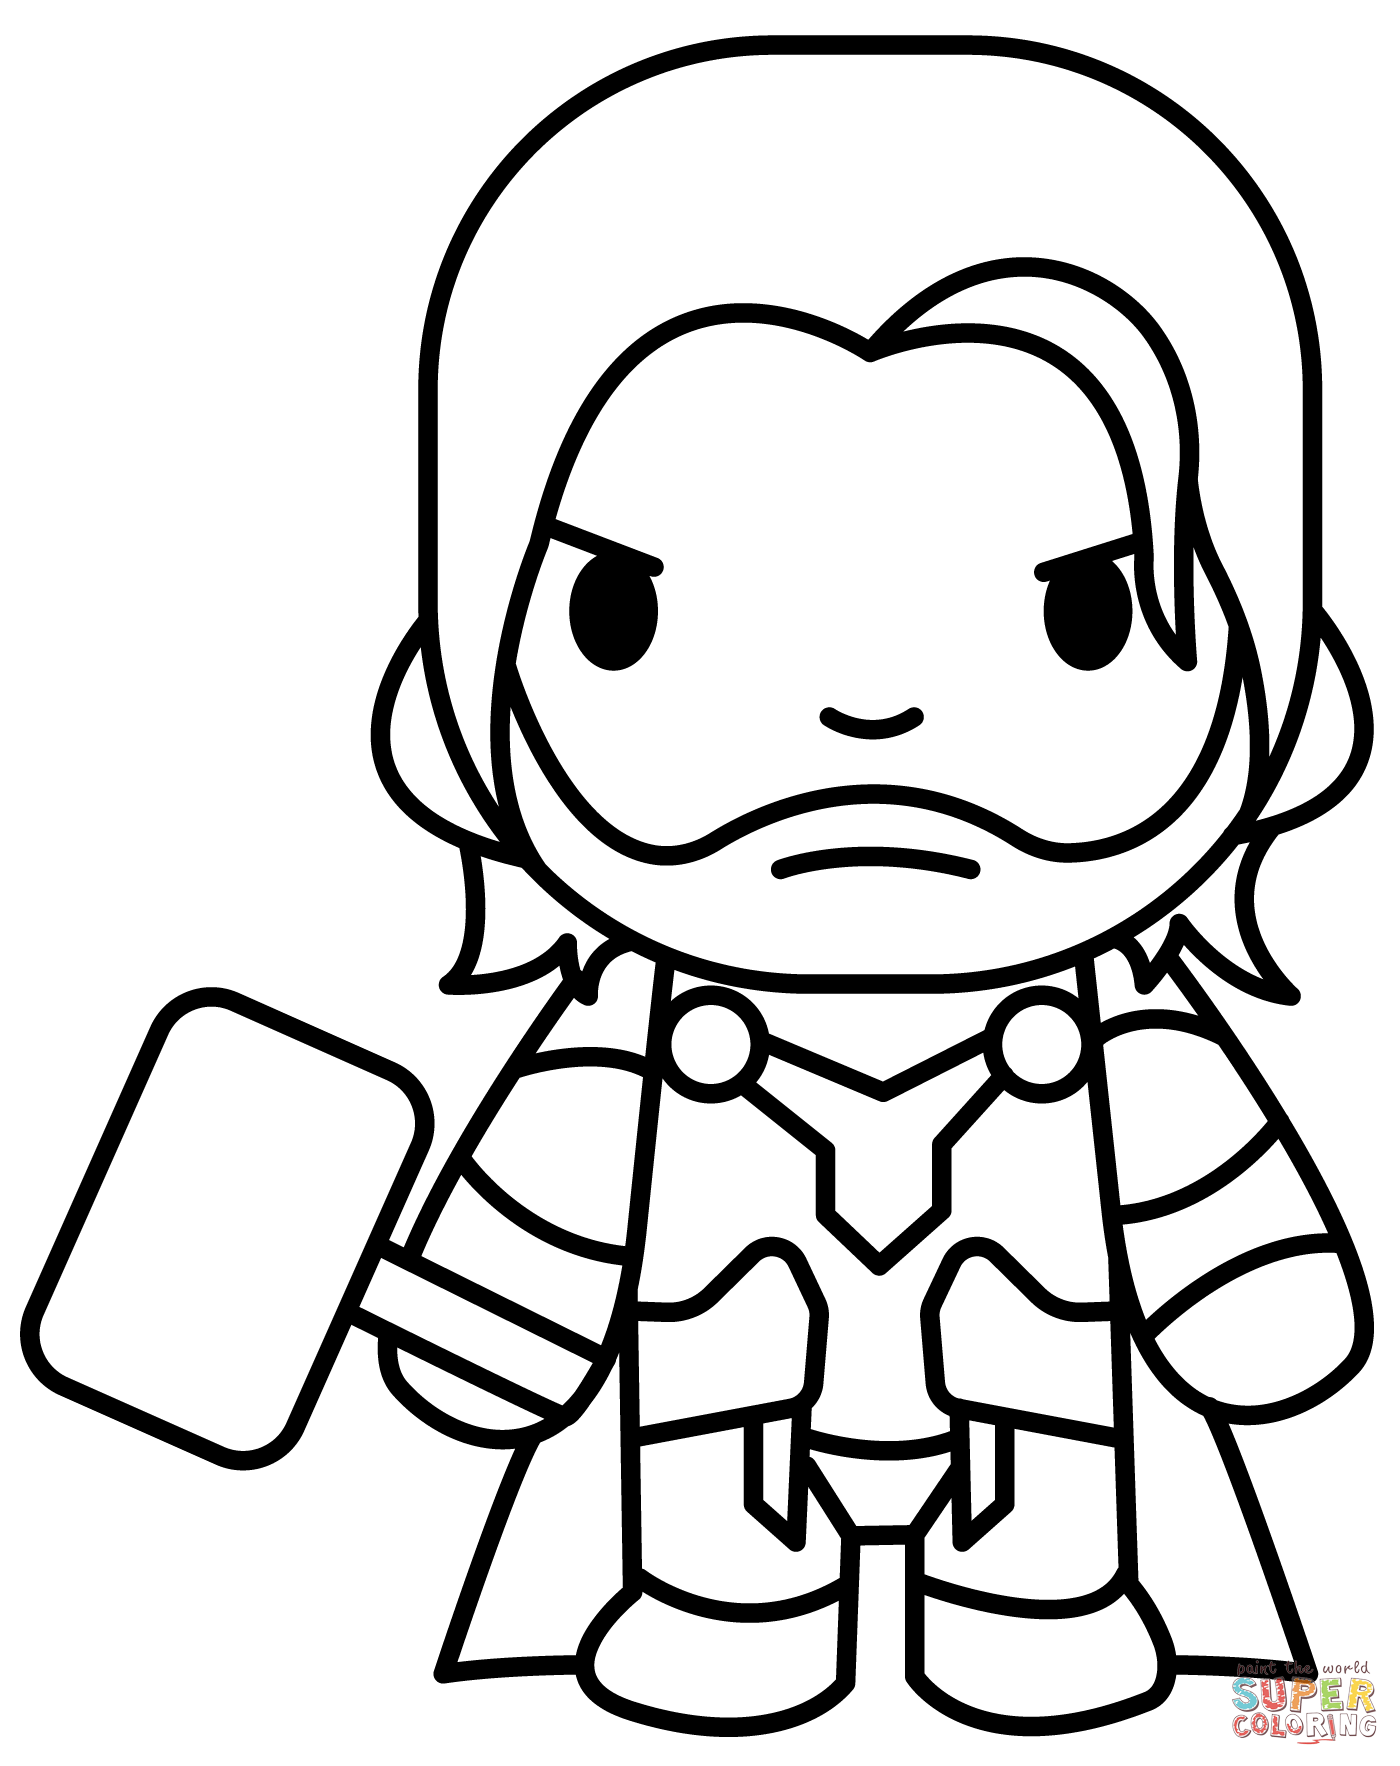 Chibi thor coloring page free printable coloring pages